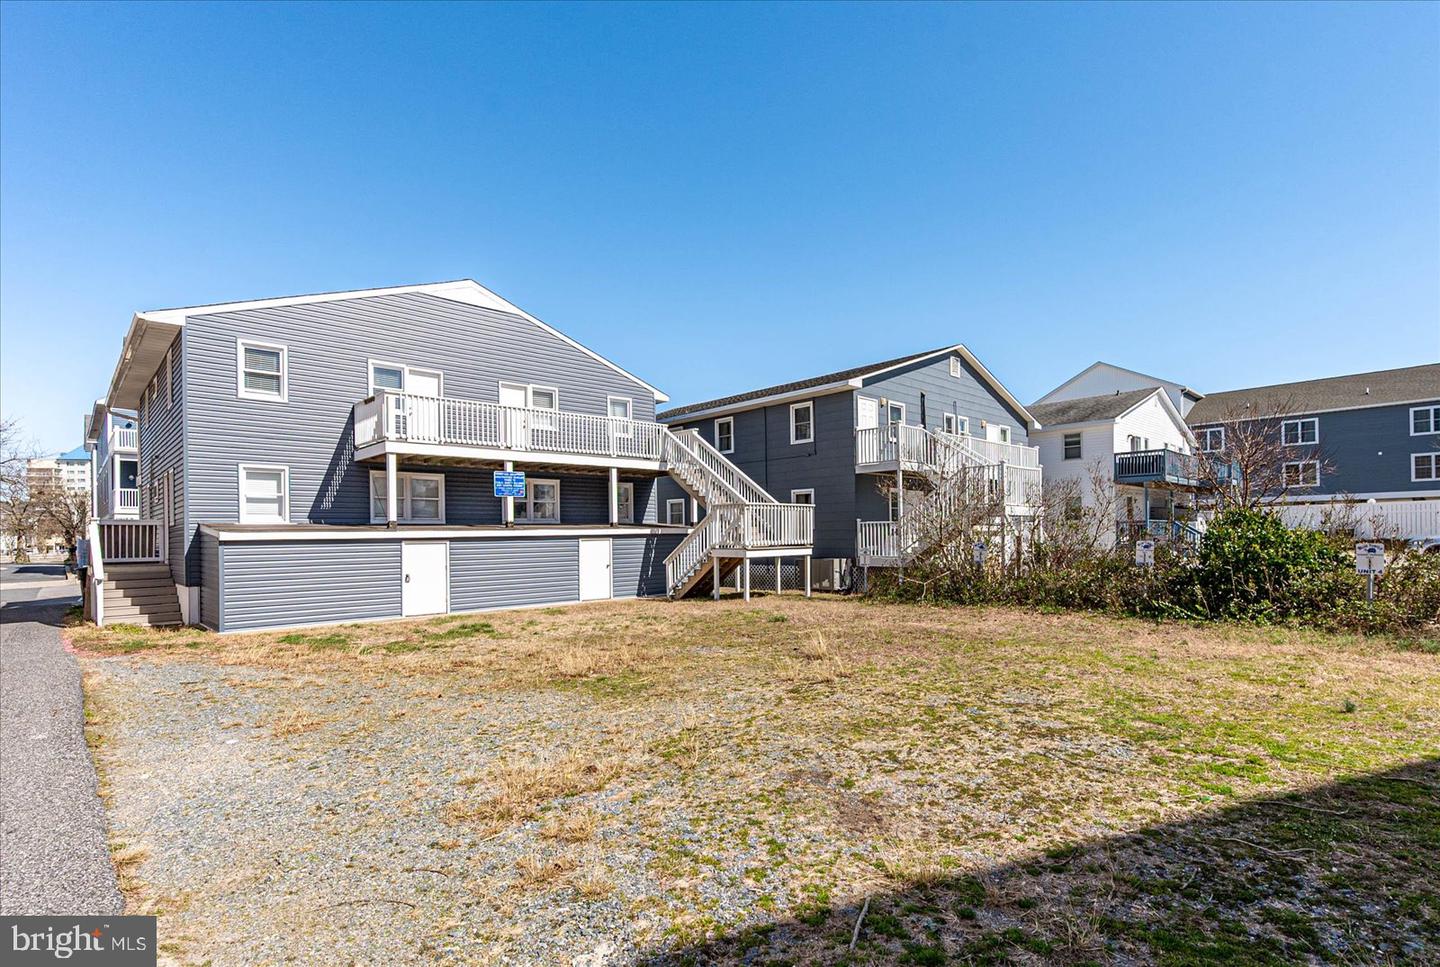 MDWO2019490-802929060596-2024-03-16-10-46-20 15 57th St | Ocean City, MD Real Estate For Sale | MLS# Mdwo2019490  - 1st Choice Properties